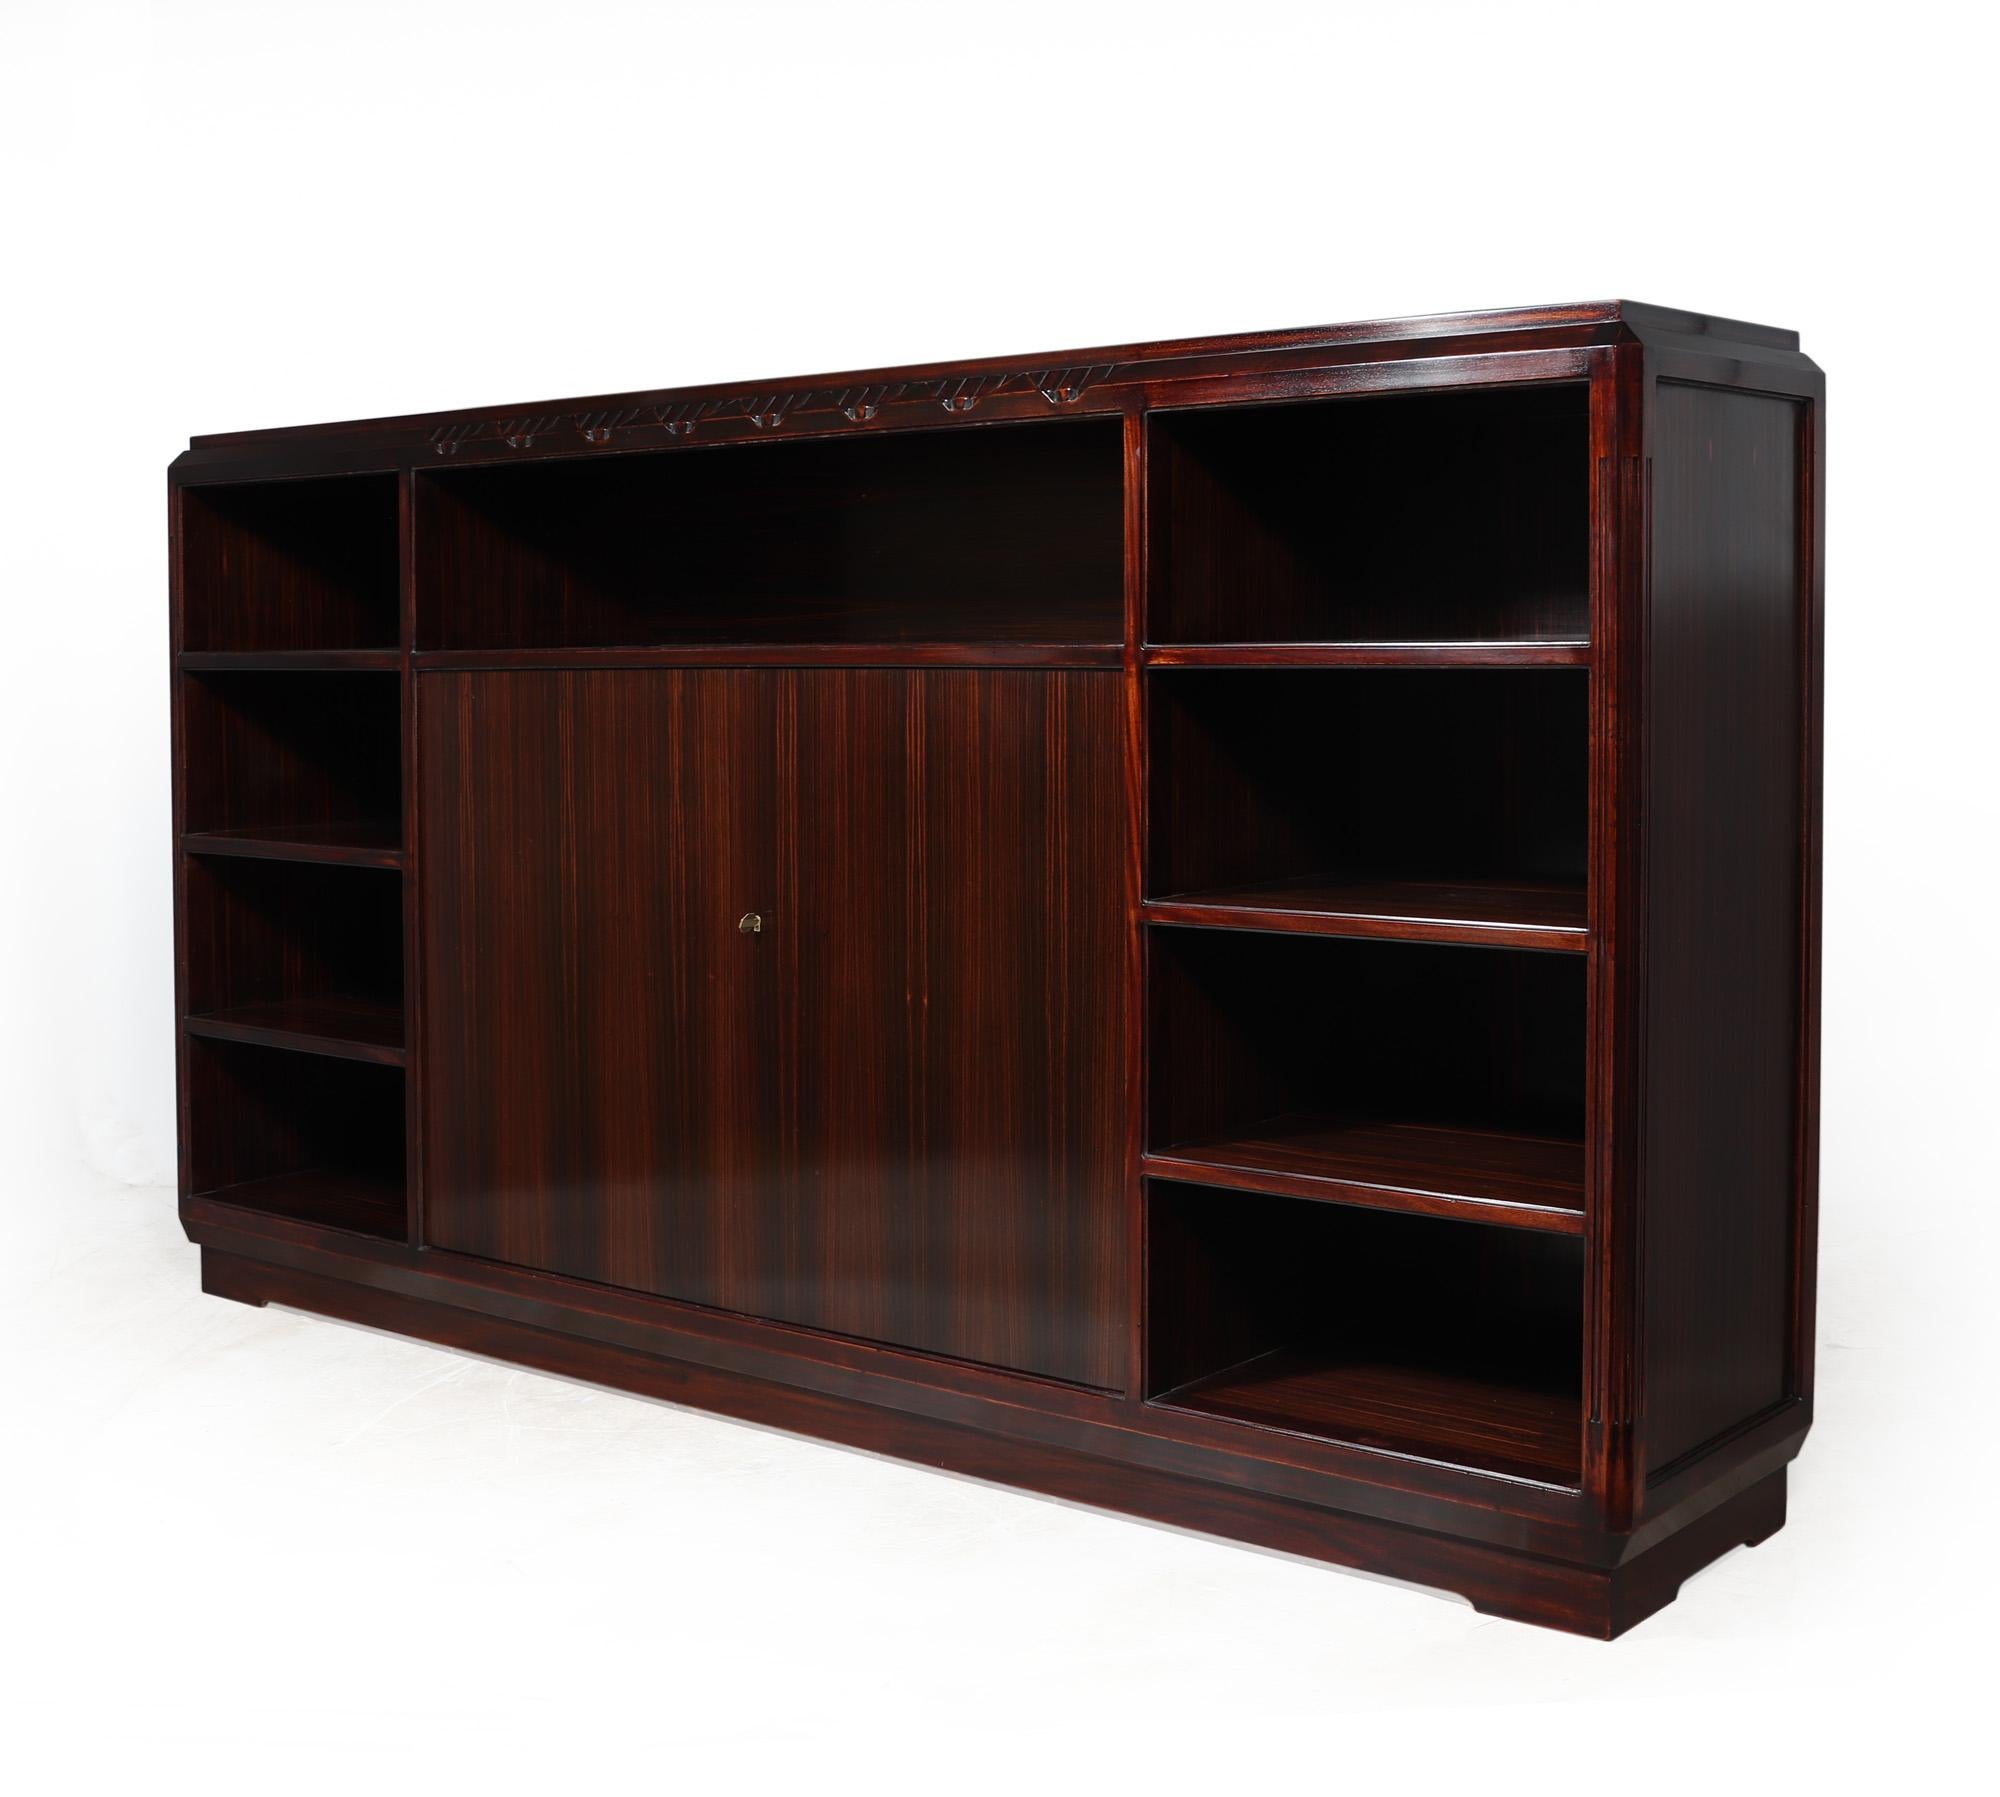 ART DECO BOOKCASE BY LOUIS MAJORELLE
A very large open library bookcase produced in Macassar Ebony with two lockable doors in the centre having the original key, the bookcase was designed and produced by Majorelle Nancy in the 1920’s in France it